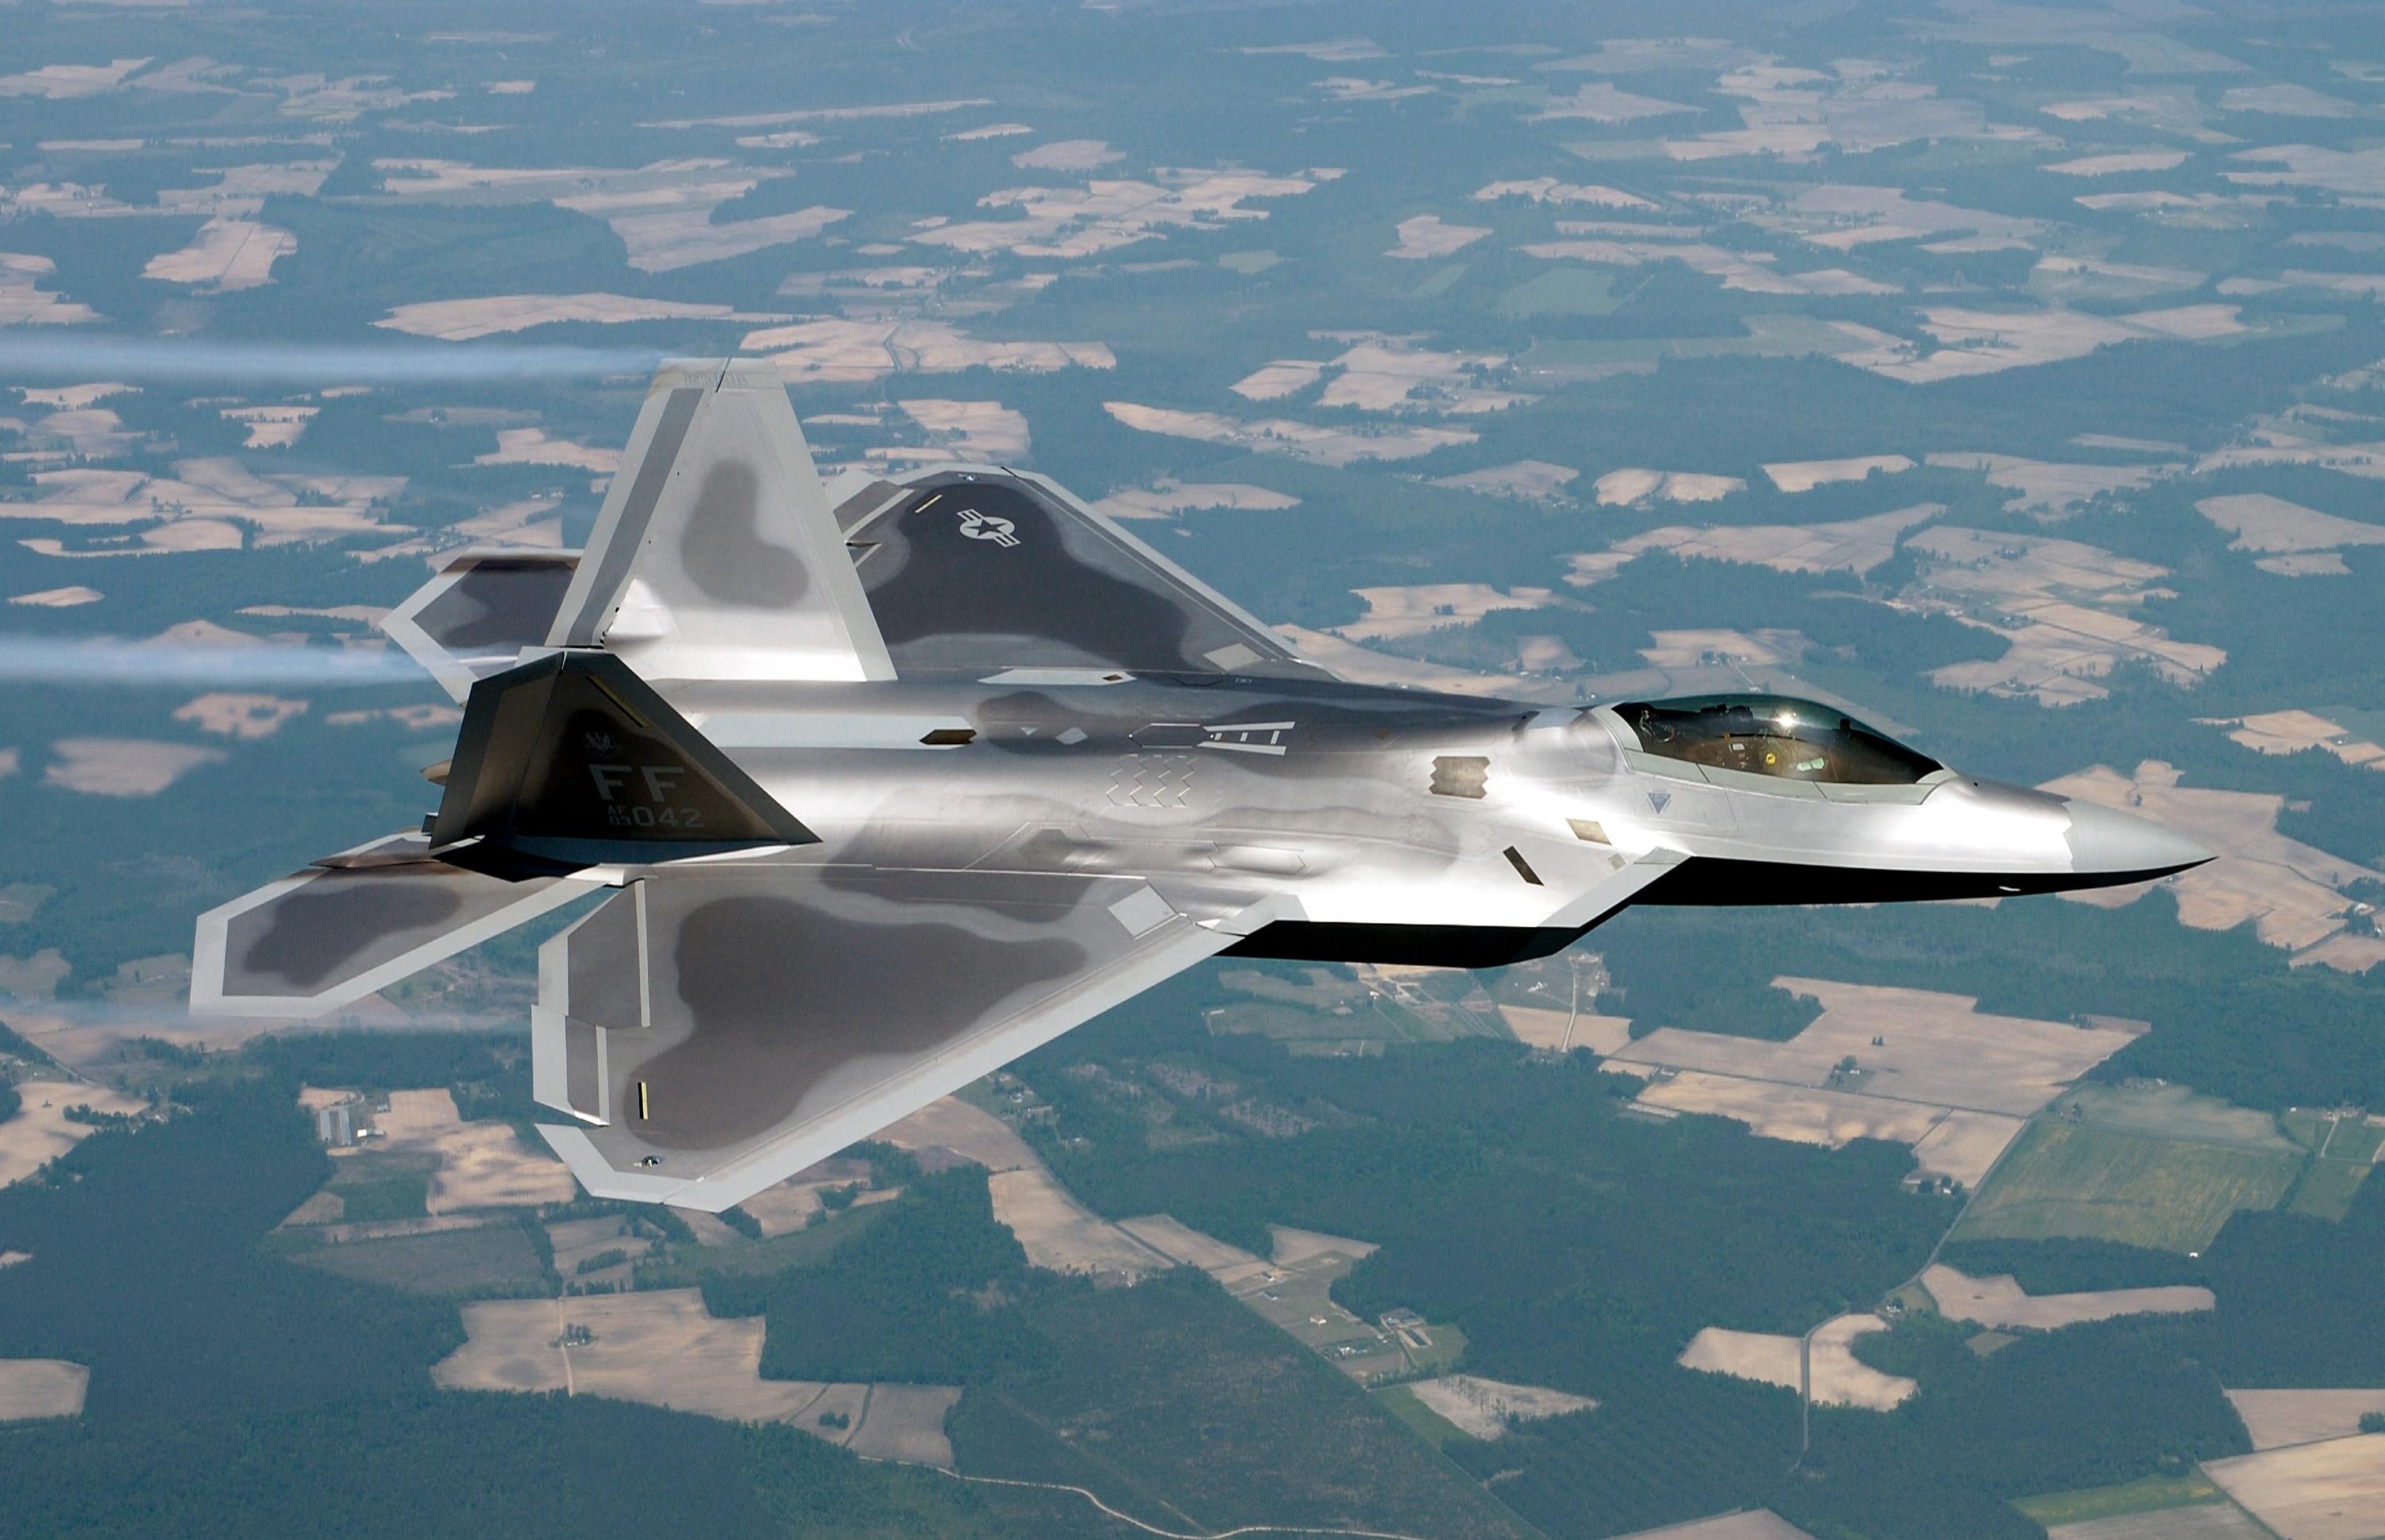 The F-22 Raptor: The World's Most Dangerous Fighter Jet Until 2060? | The National Interest